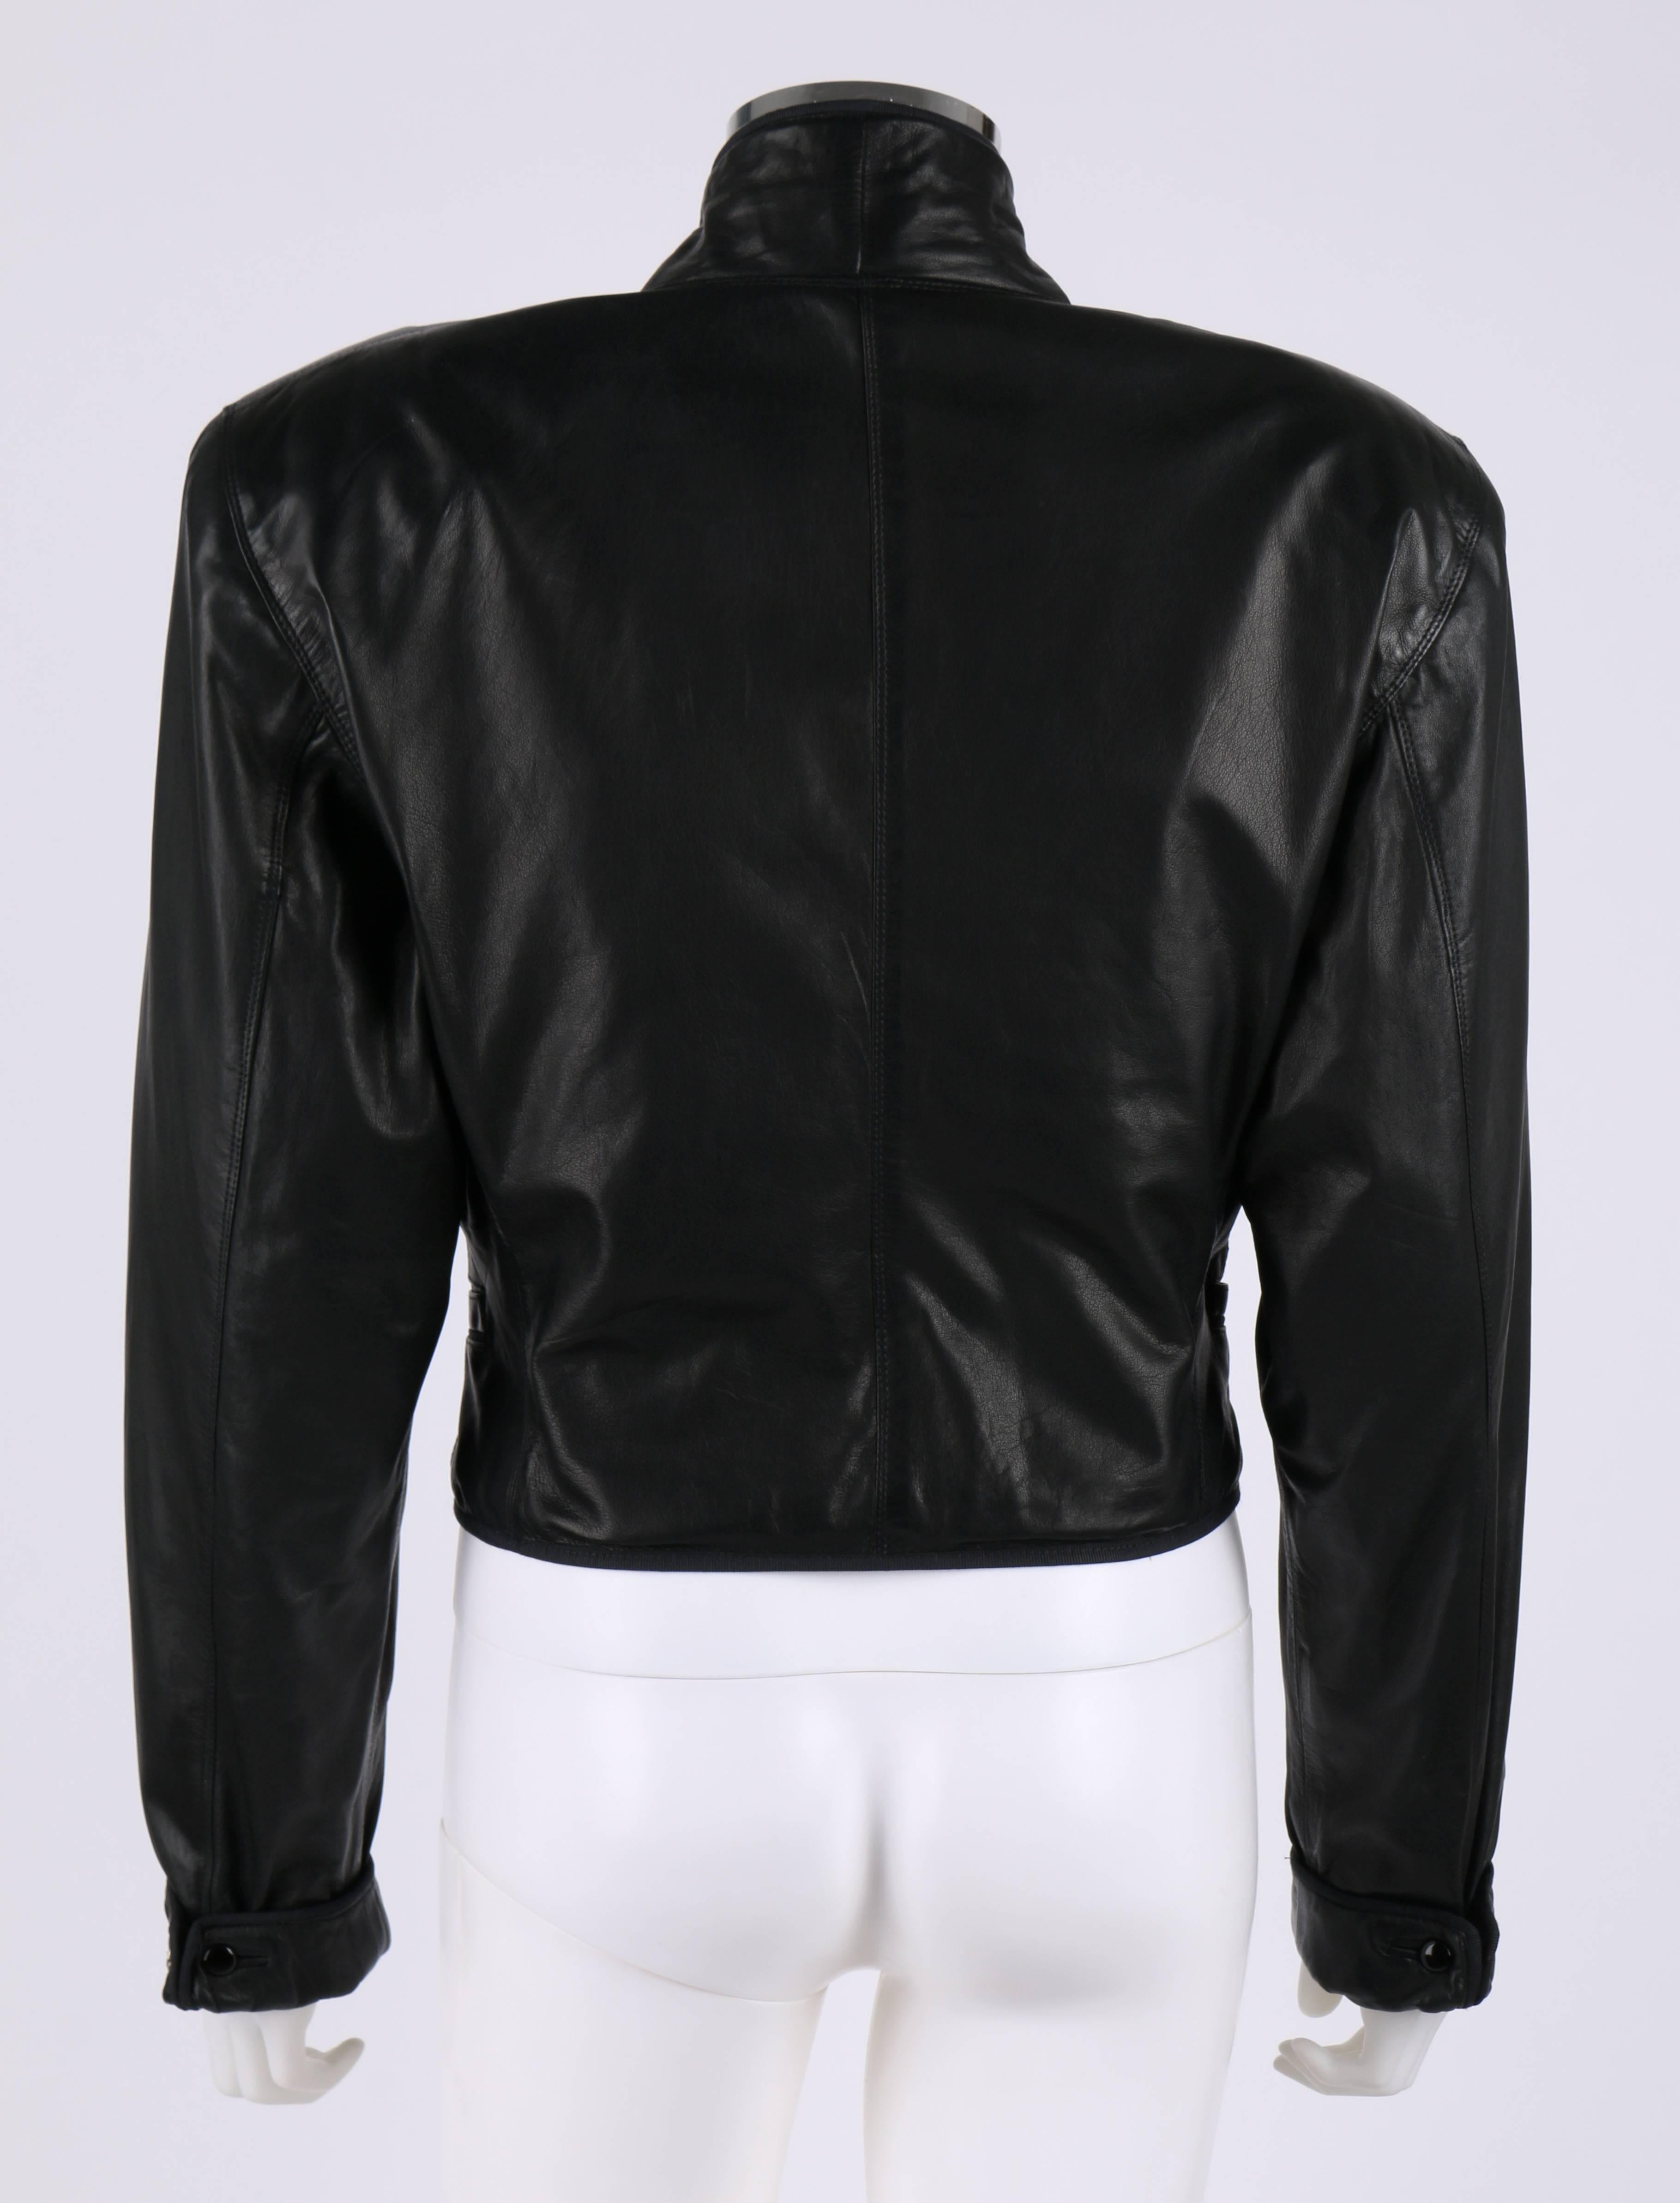 GIANNI VERSACE c.1980's Black Leather Cropped Blazer Jacket  In Good Condition For Sale In Thiensville, WI